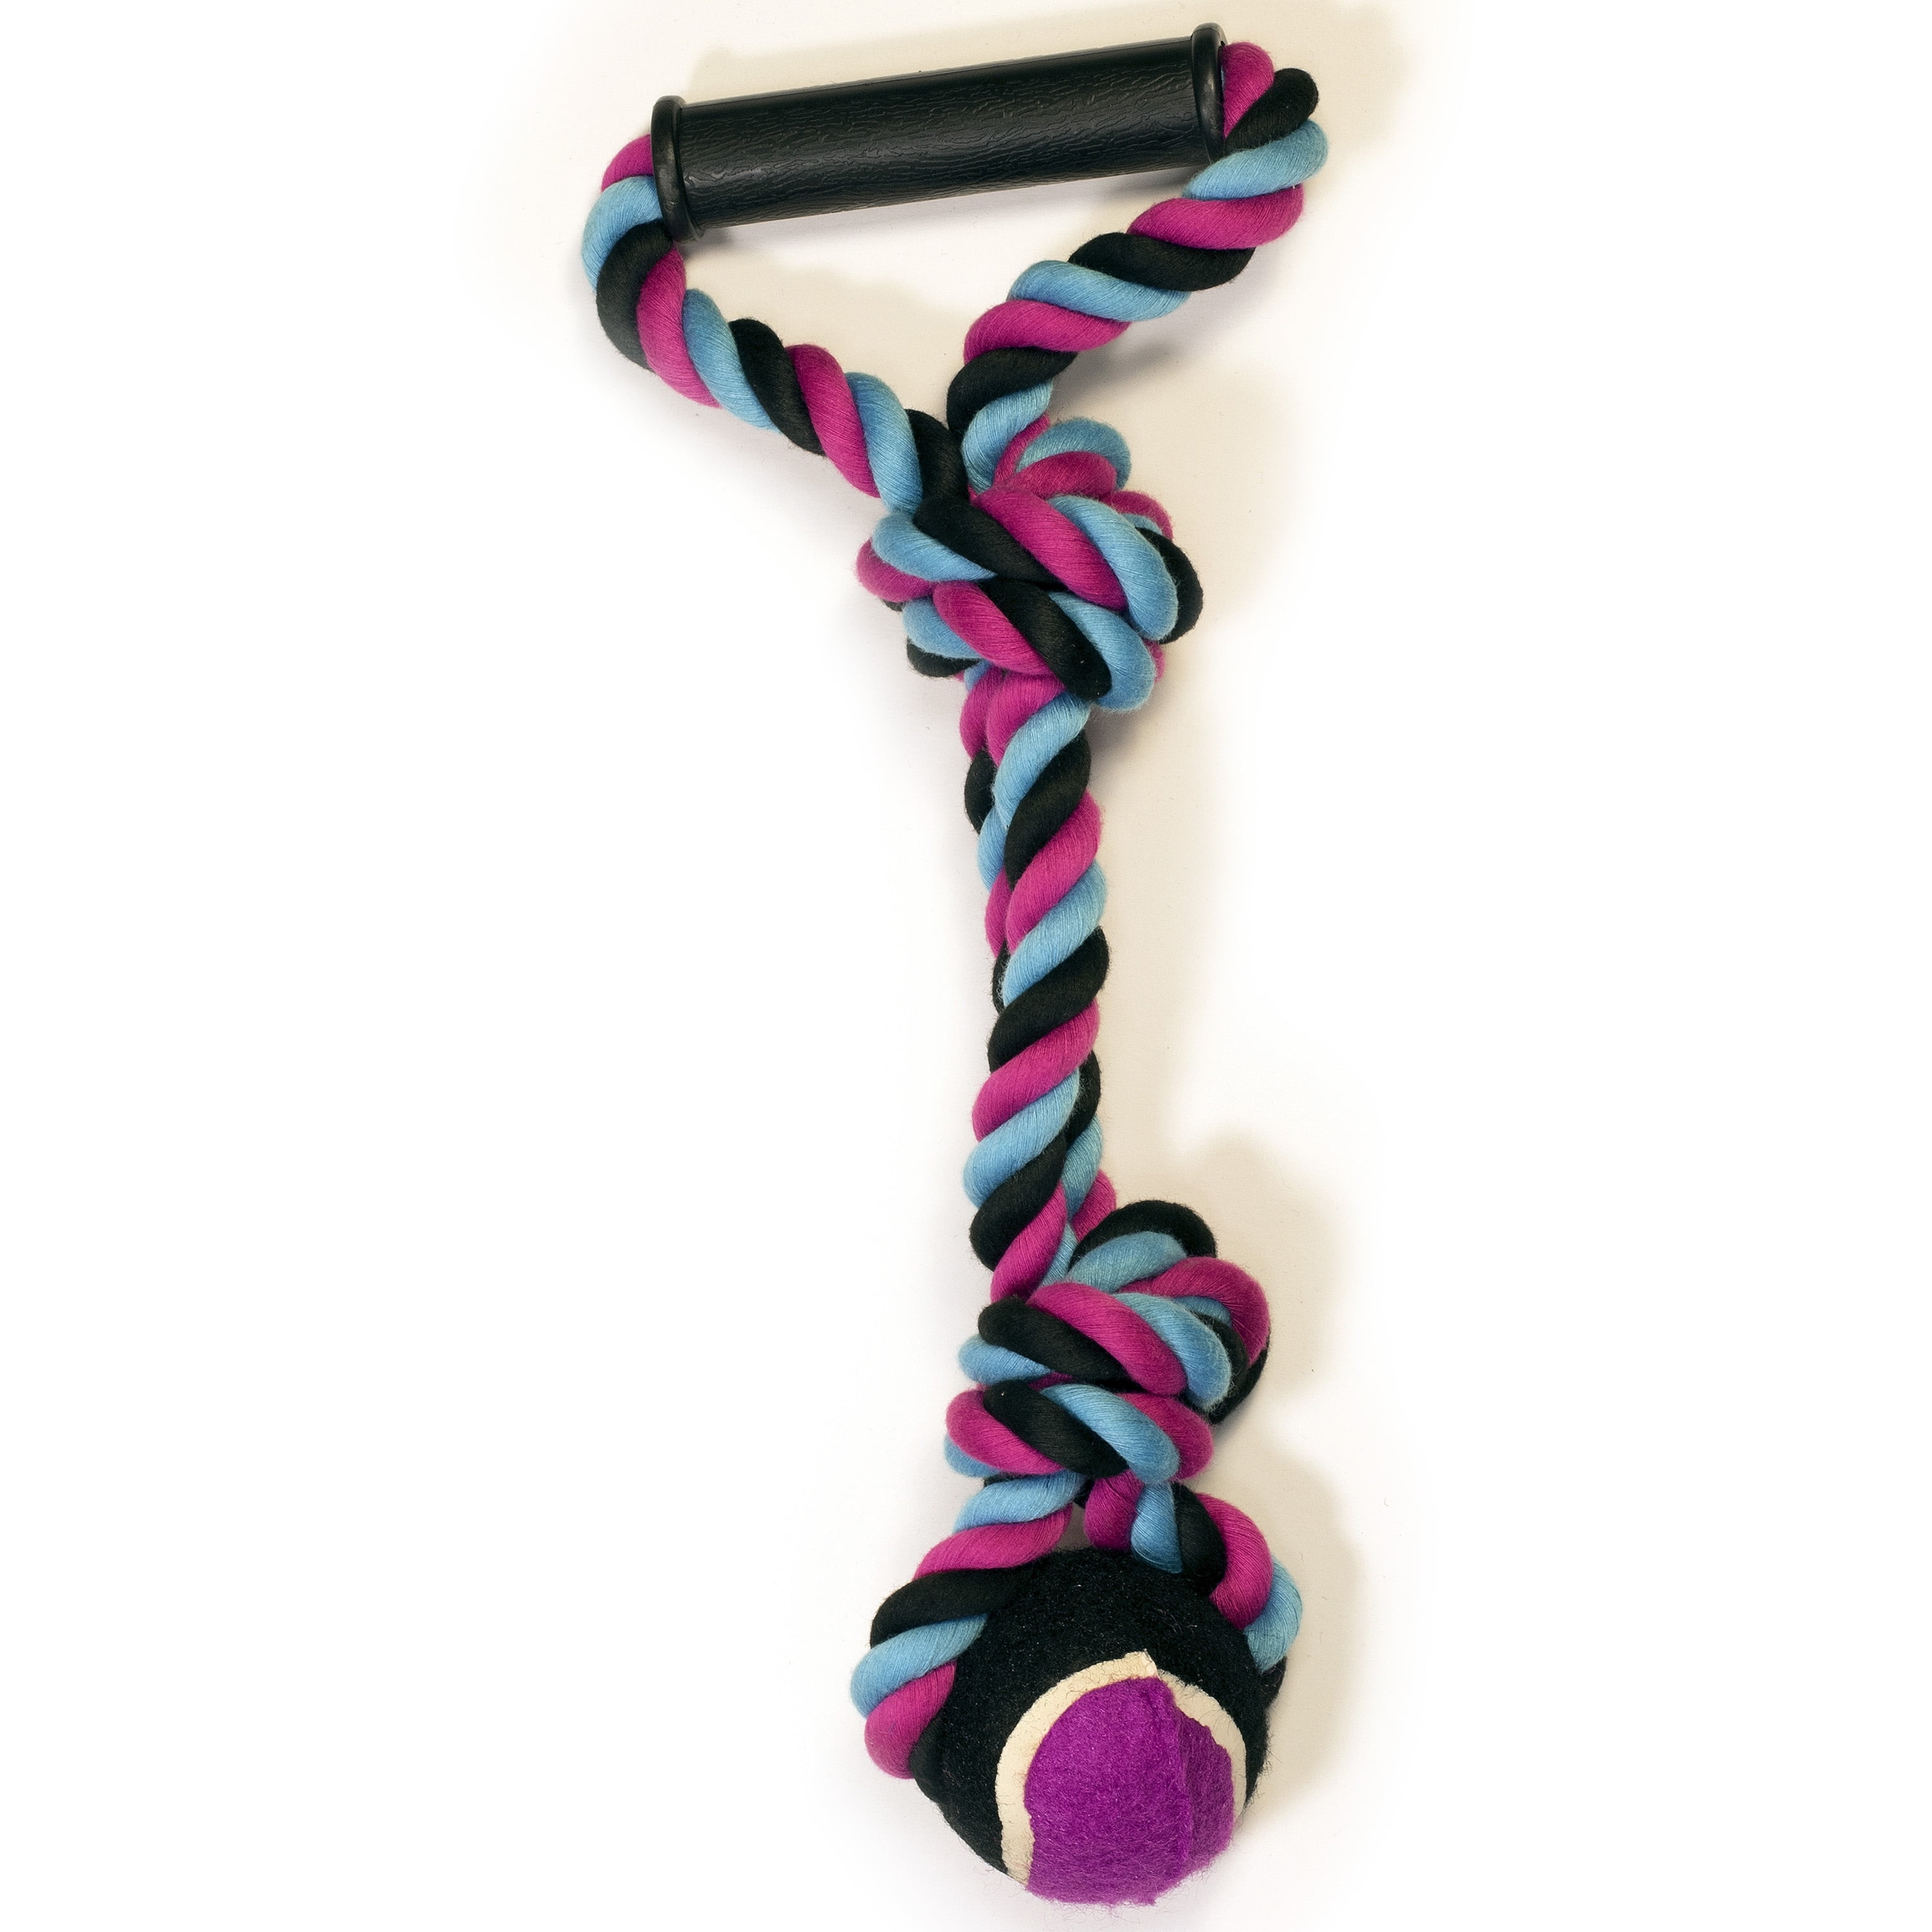 Pet Champion 2 Knot Medium Rope Ball Dog Toy with Handle